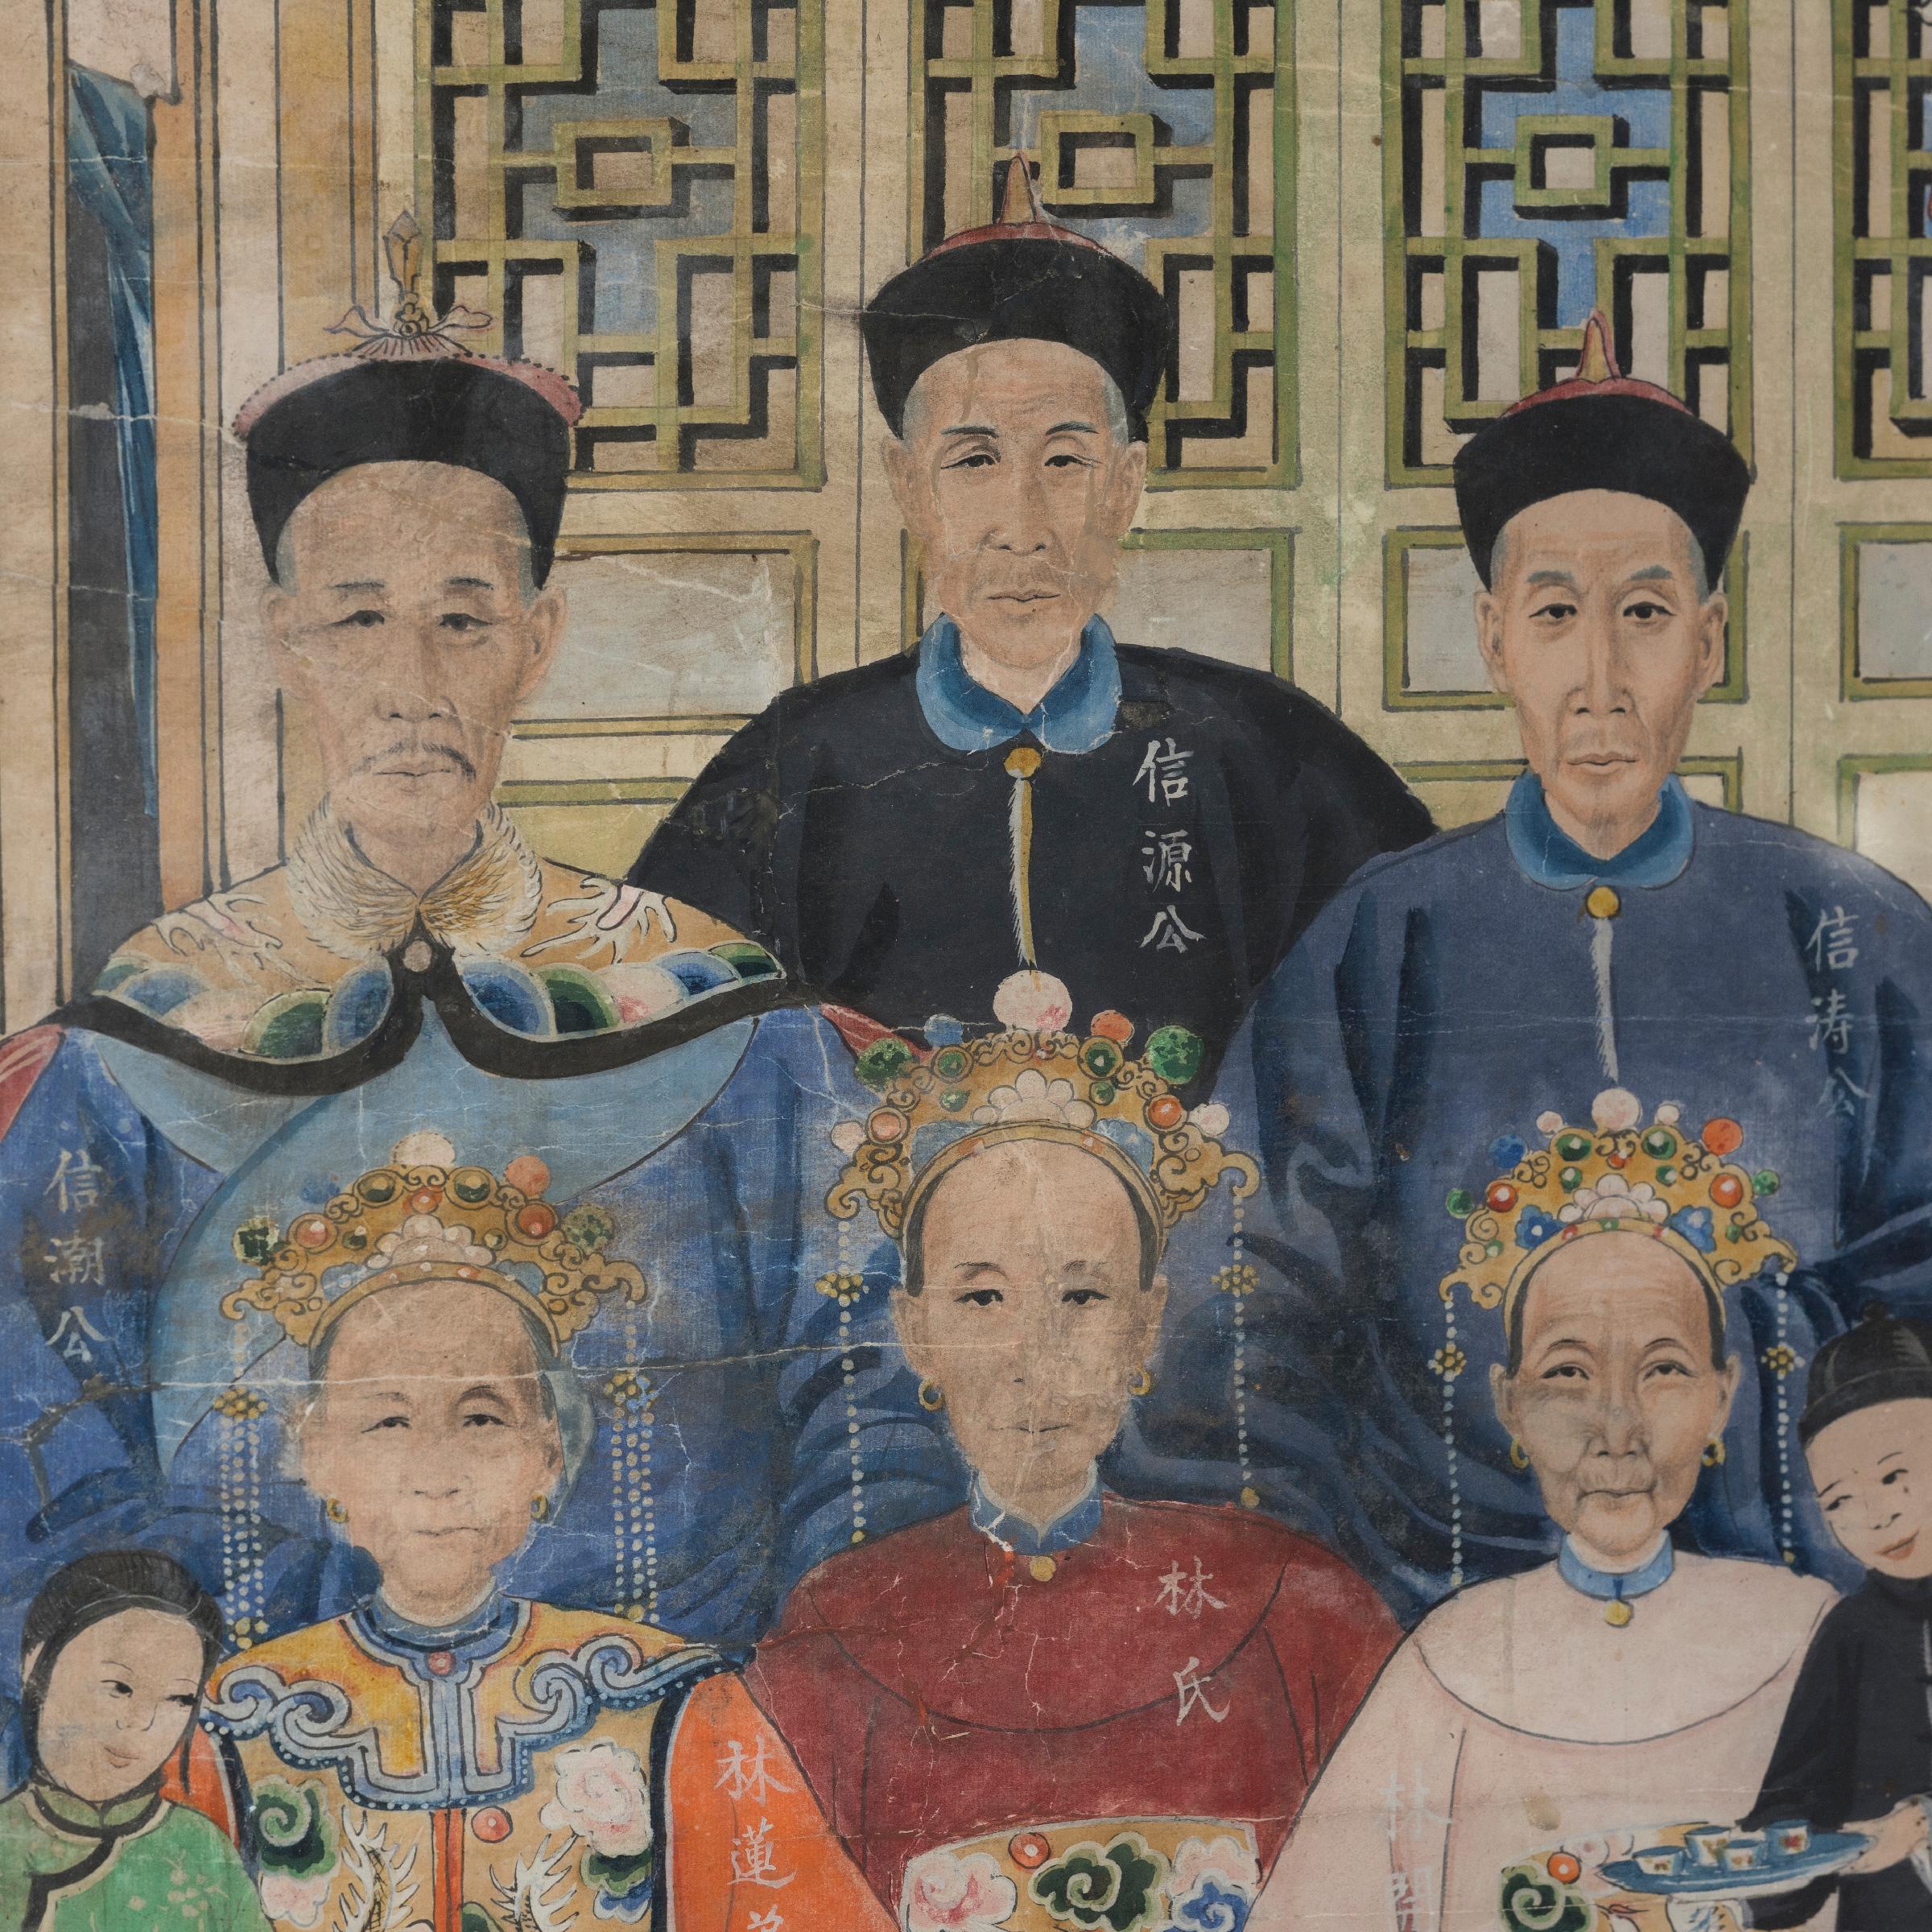 Chinese Framed Ancestor Portrait, c. 1850 - Qing Painting by Unknown